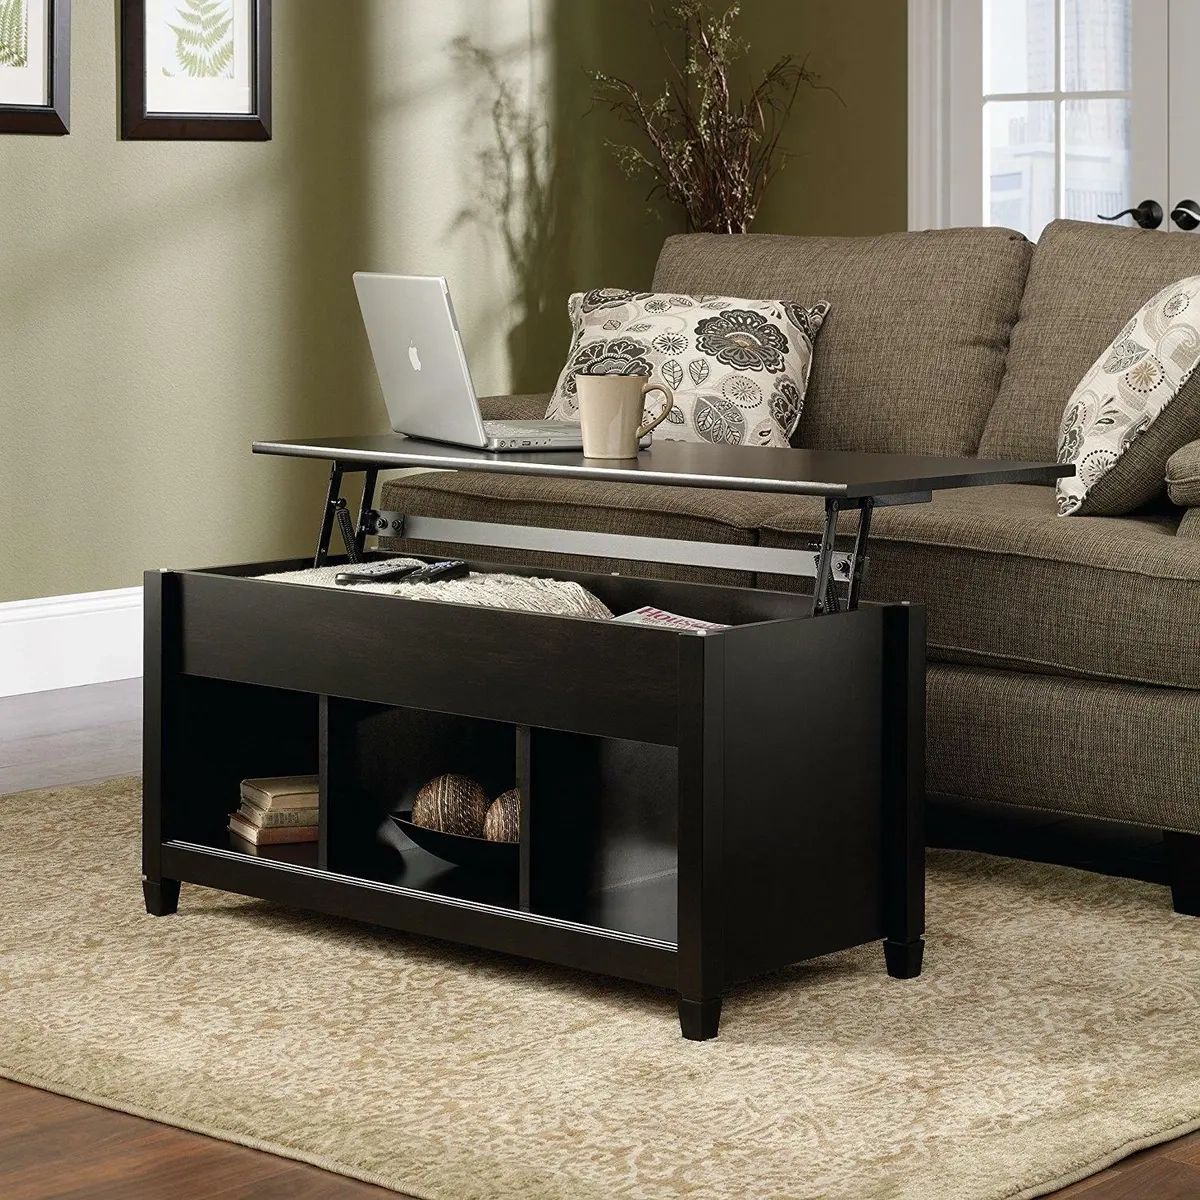 Lift Top Coffee Table Modern Furniture W/Hidden Storage Compartment & Shelf  | Ebay Intended For Modern Coffee Tables With Hidden Storage Compartments (View 2 of 15)